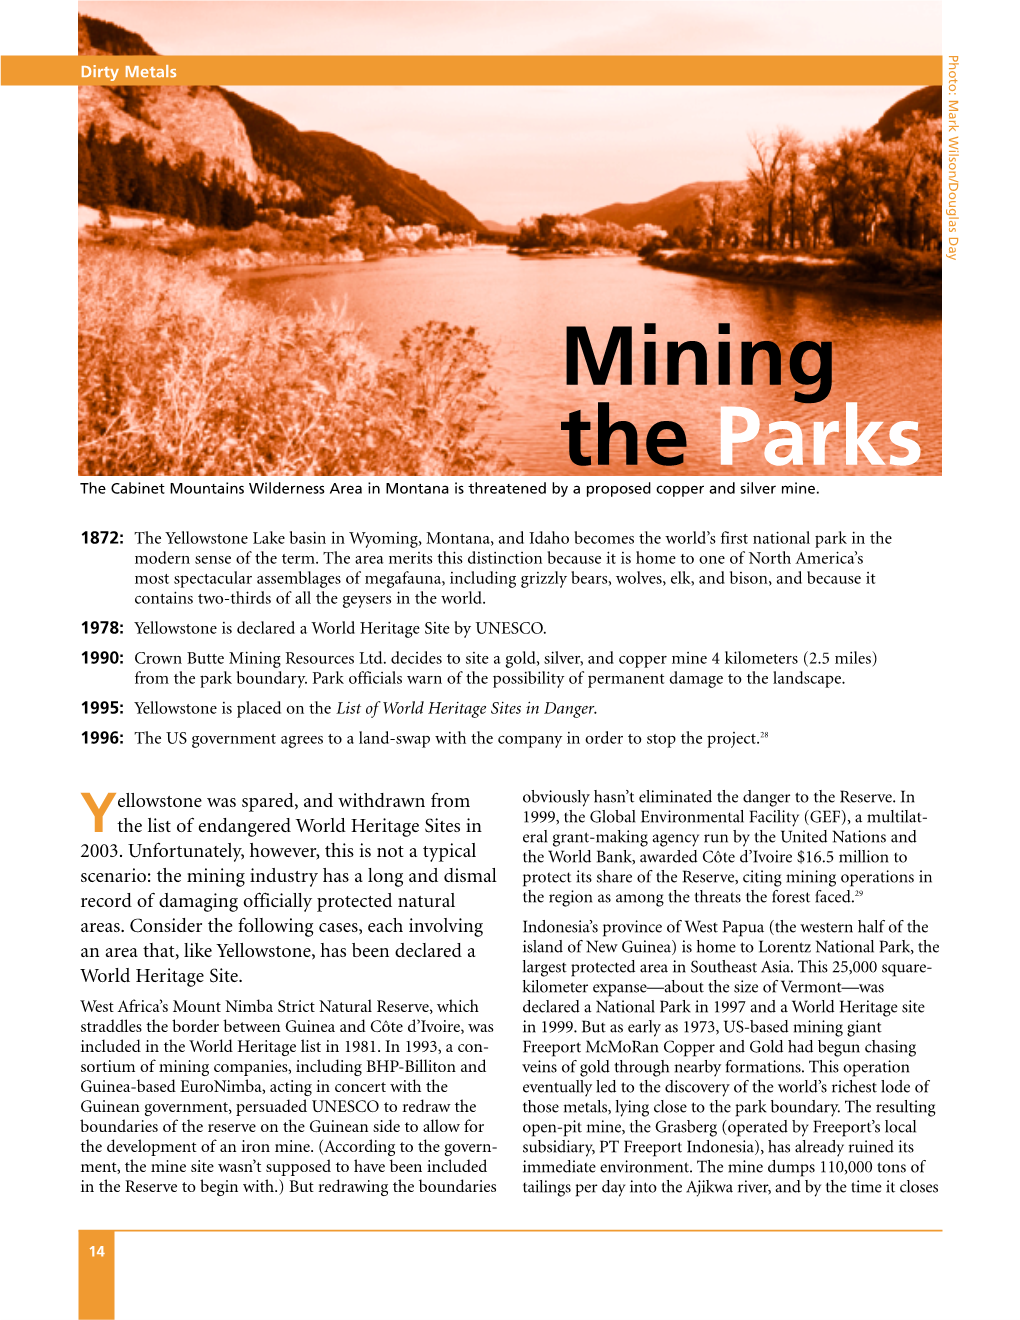 Mining the Parks the Cabinet Mountains Wilderness Area in Montana Is Threatened by a Proposed Copper and Silver Mine